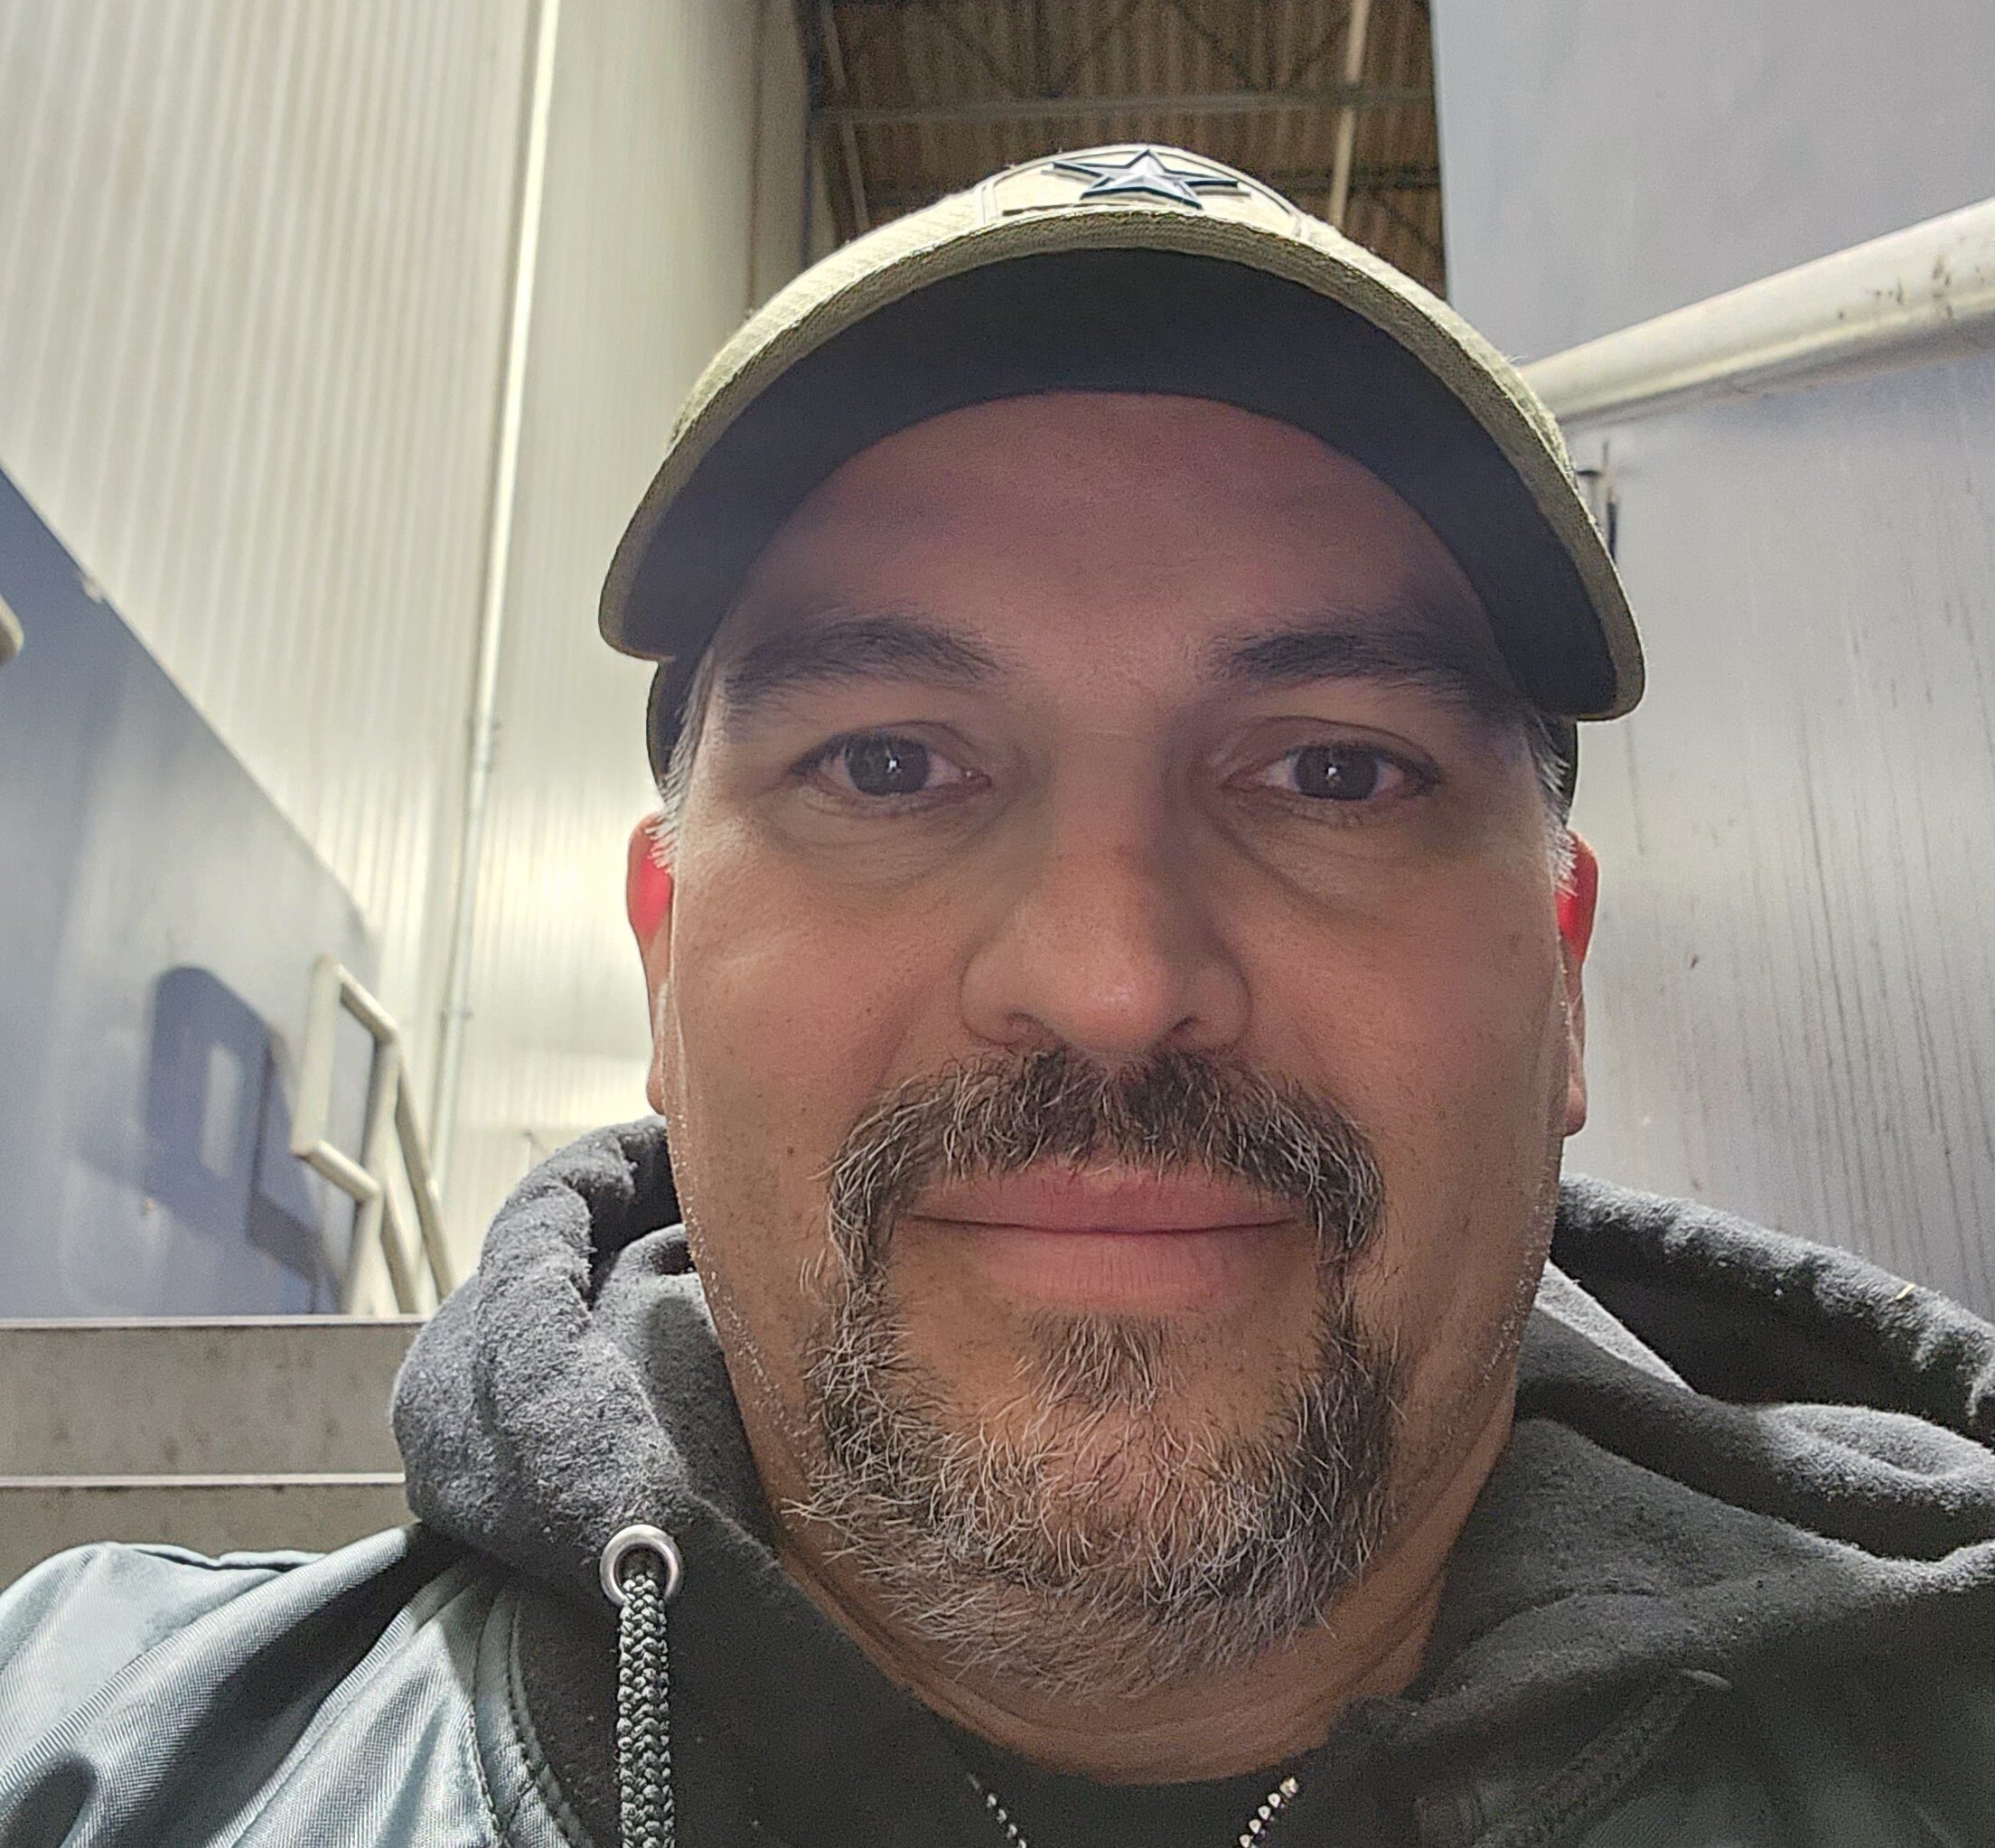 Photo of man, David Garza, smiling at the camera with baseball cap on. He has shared his story living with type 2 diabetes and using time in range.